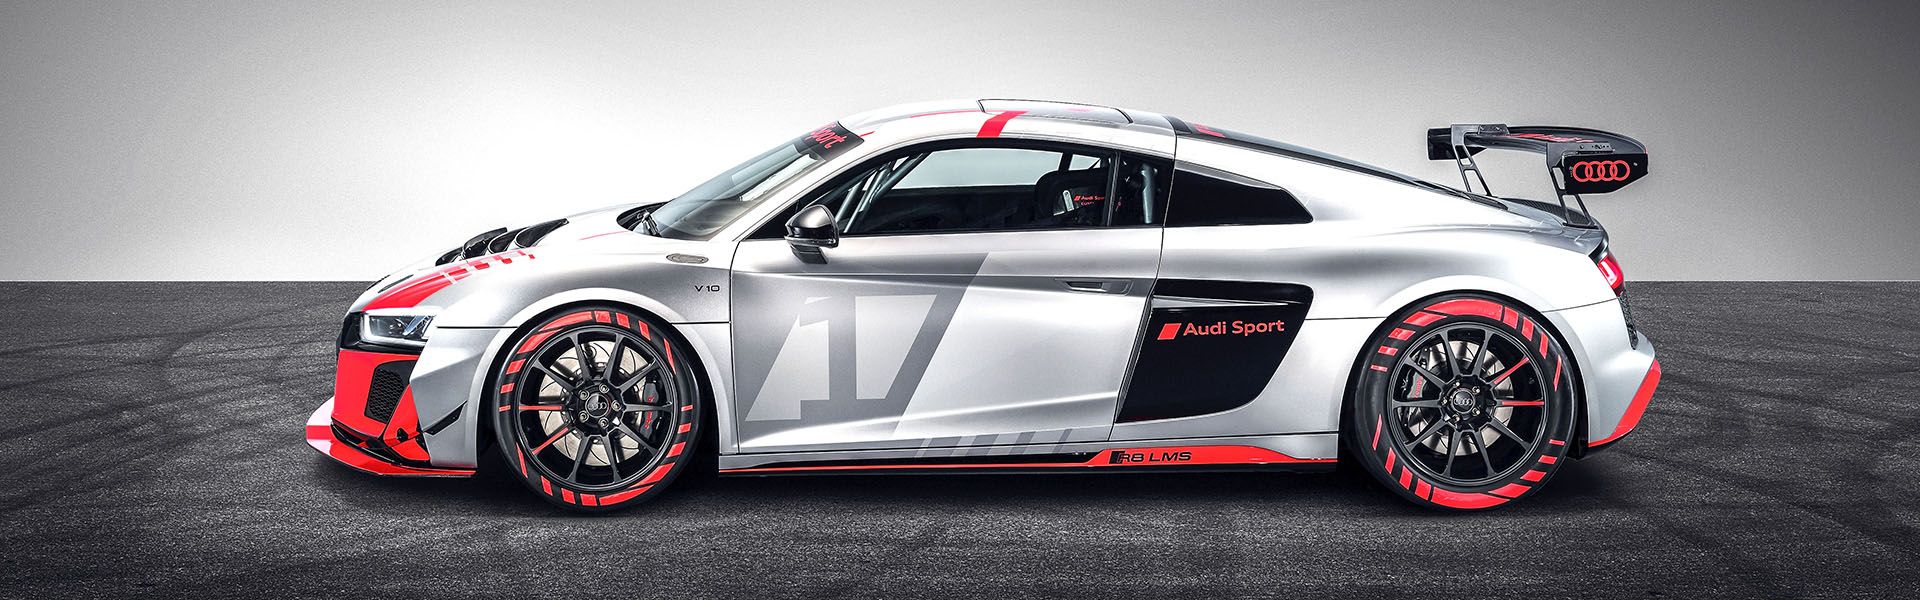 Audi Sport's new GT4 race car was star of its NY International